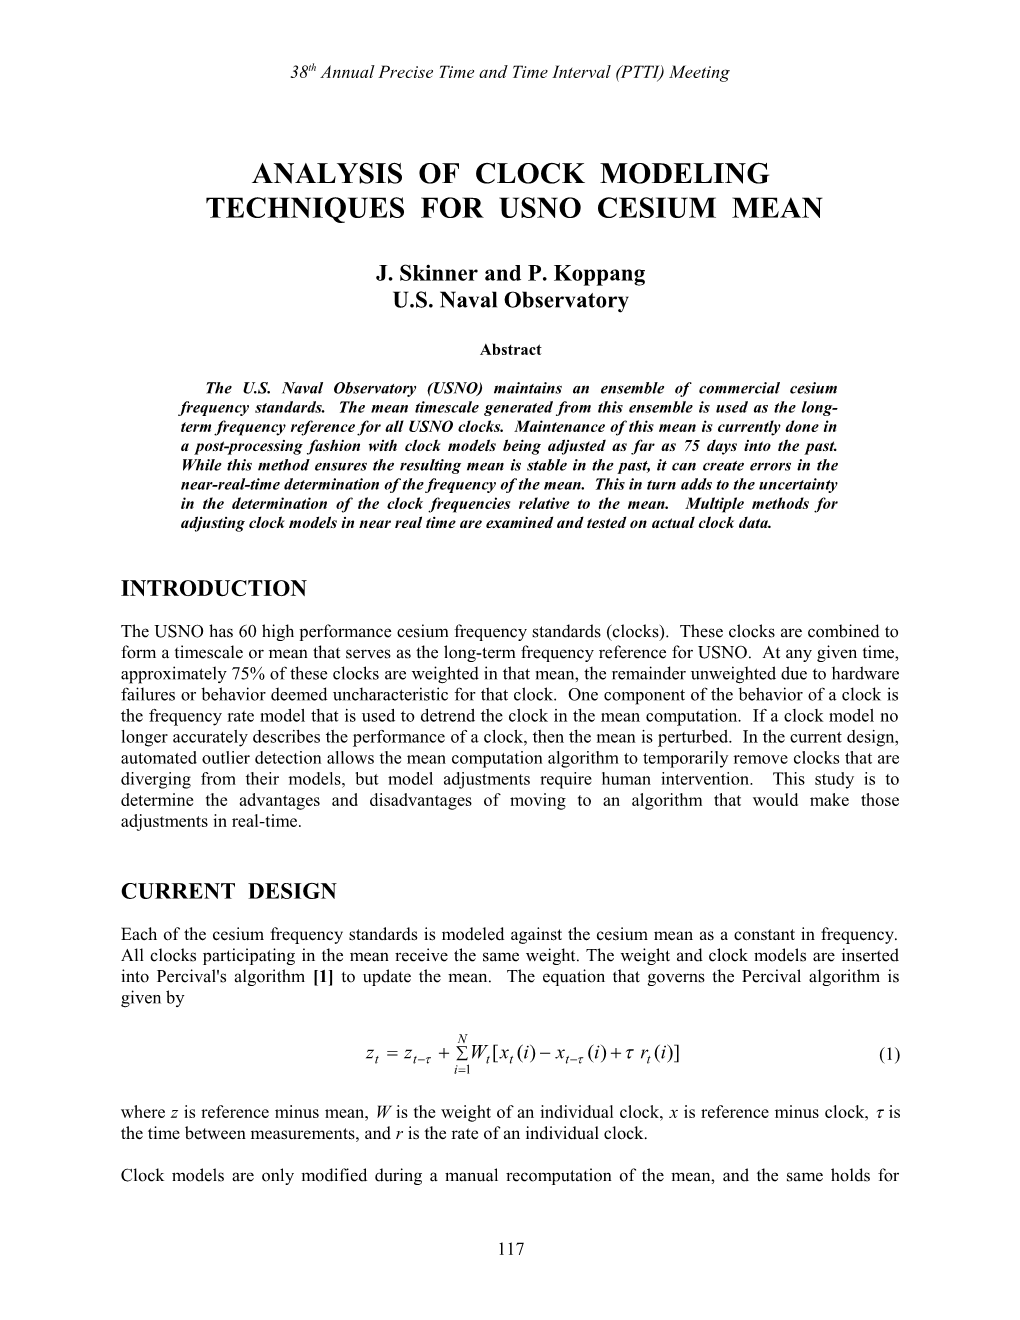 Analysis of Clock Modeling Techniques for USNO Cesium Mean